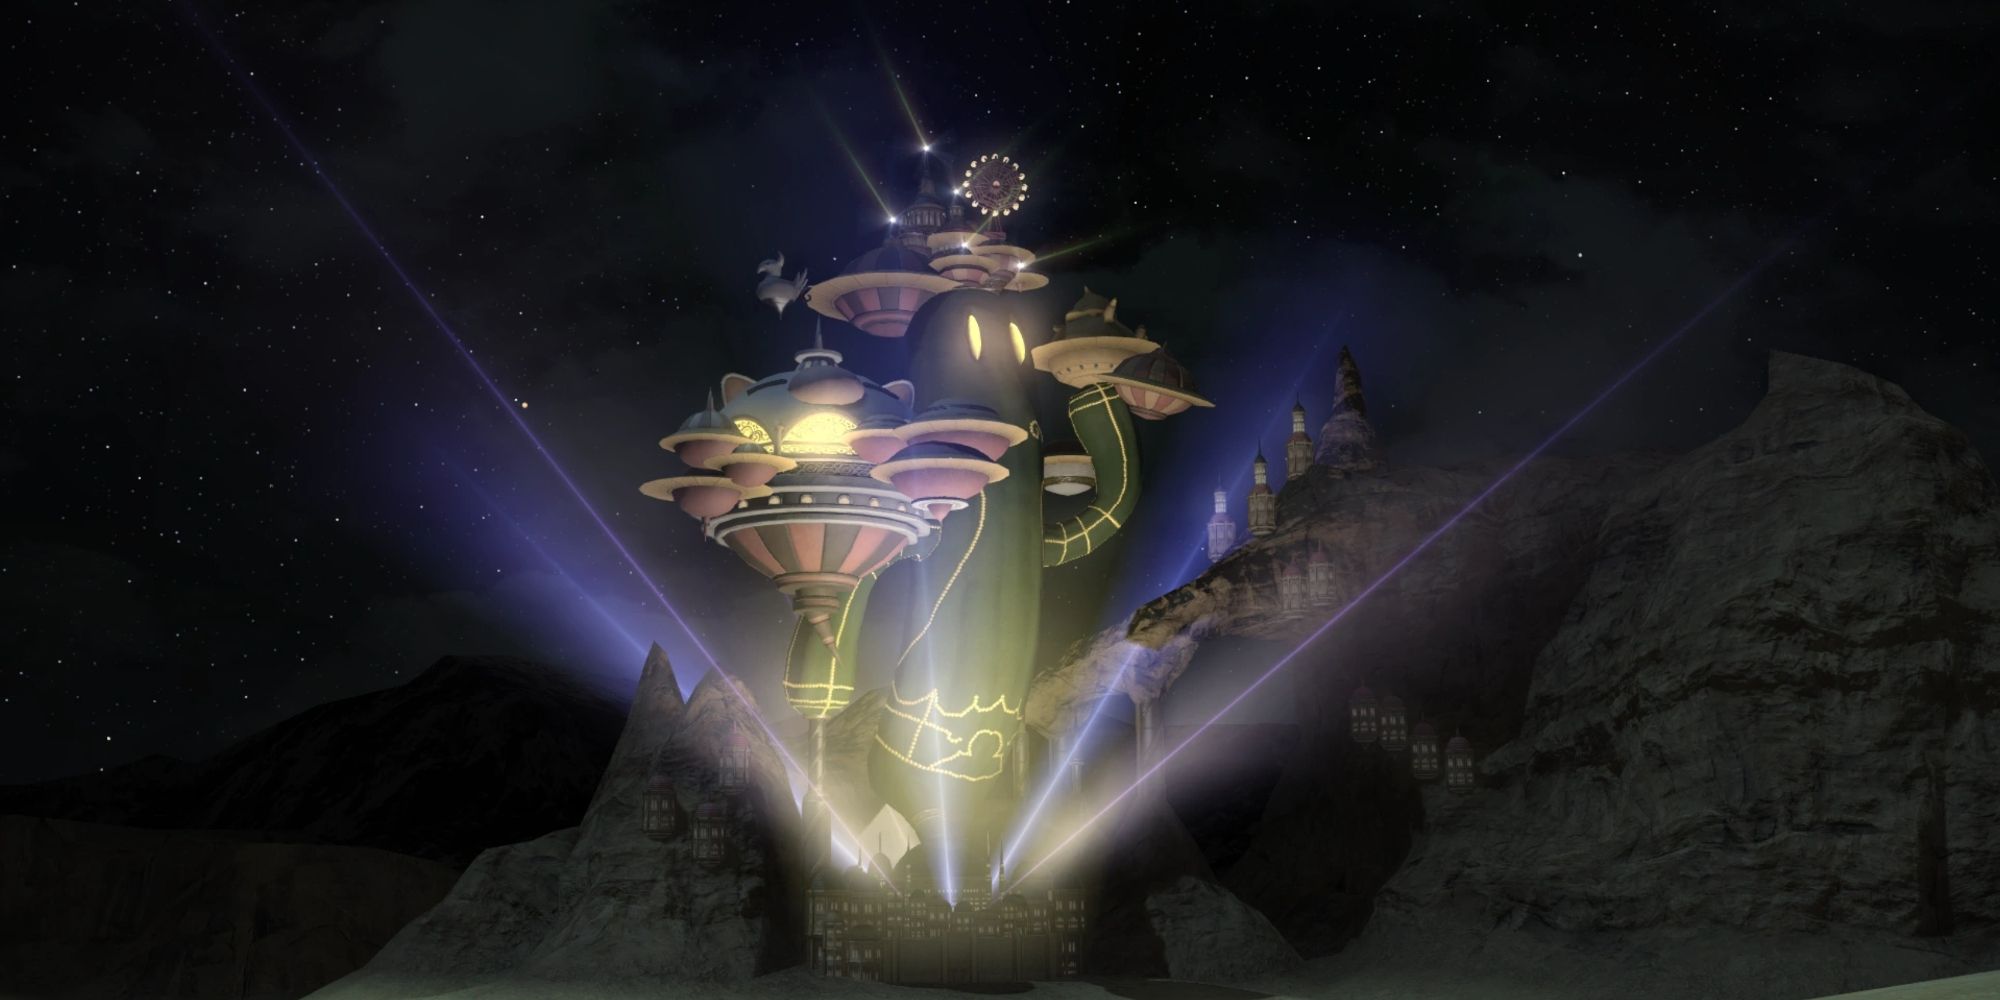 The Manderville Gold Saucer from Final Fantasy 14 is a large Cactuar structured balancing plate with brightly lit arms and head.